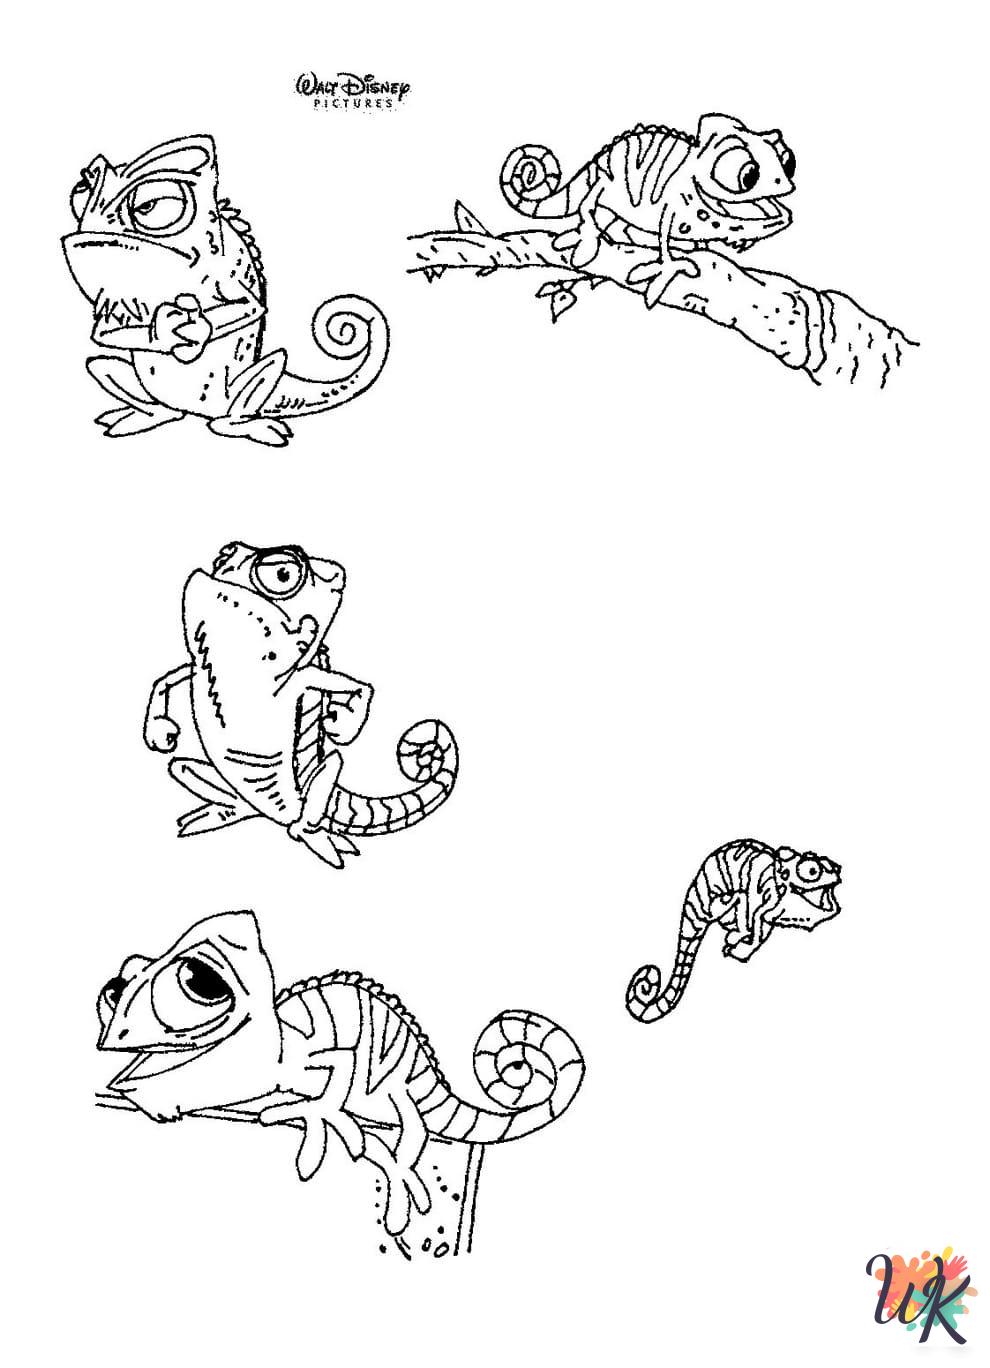 detailed Tangled coloring pages for adults